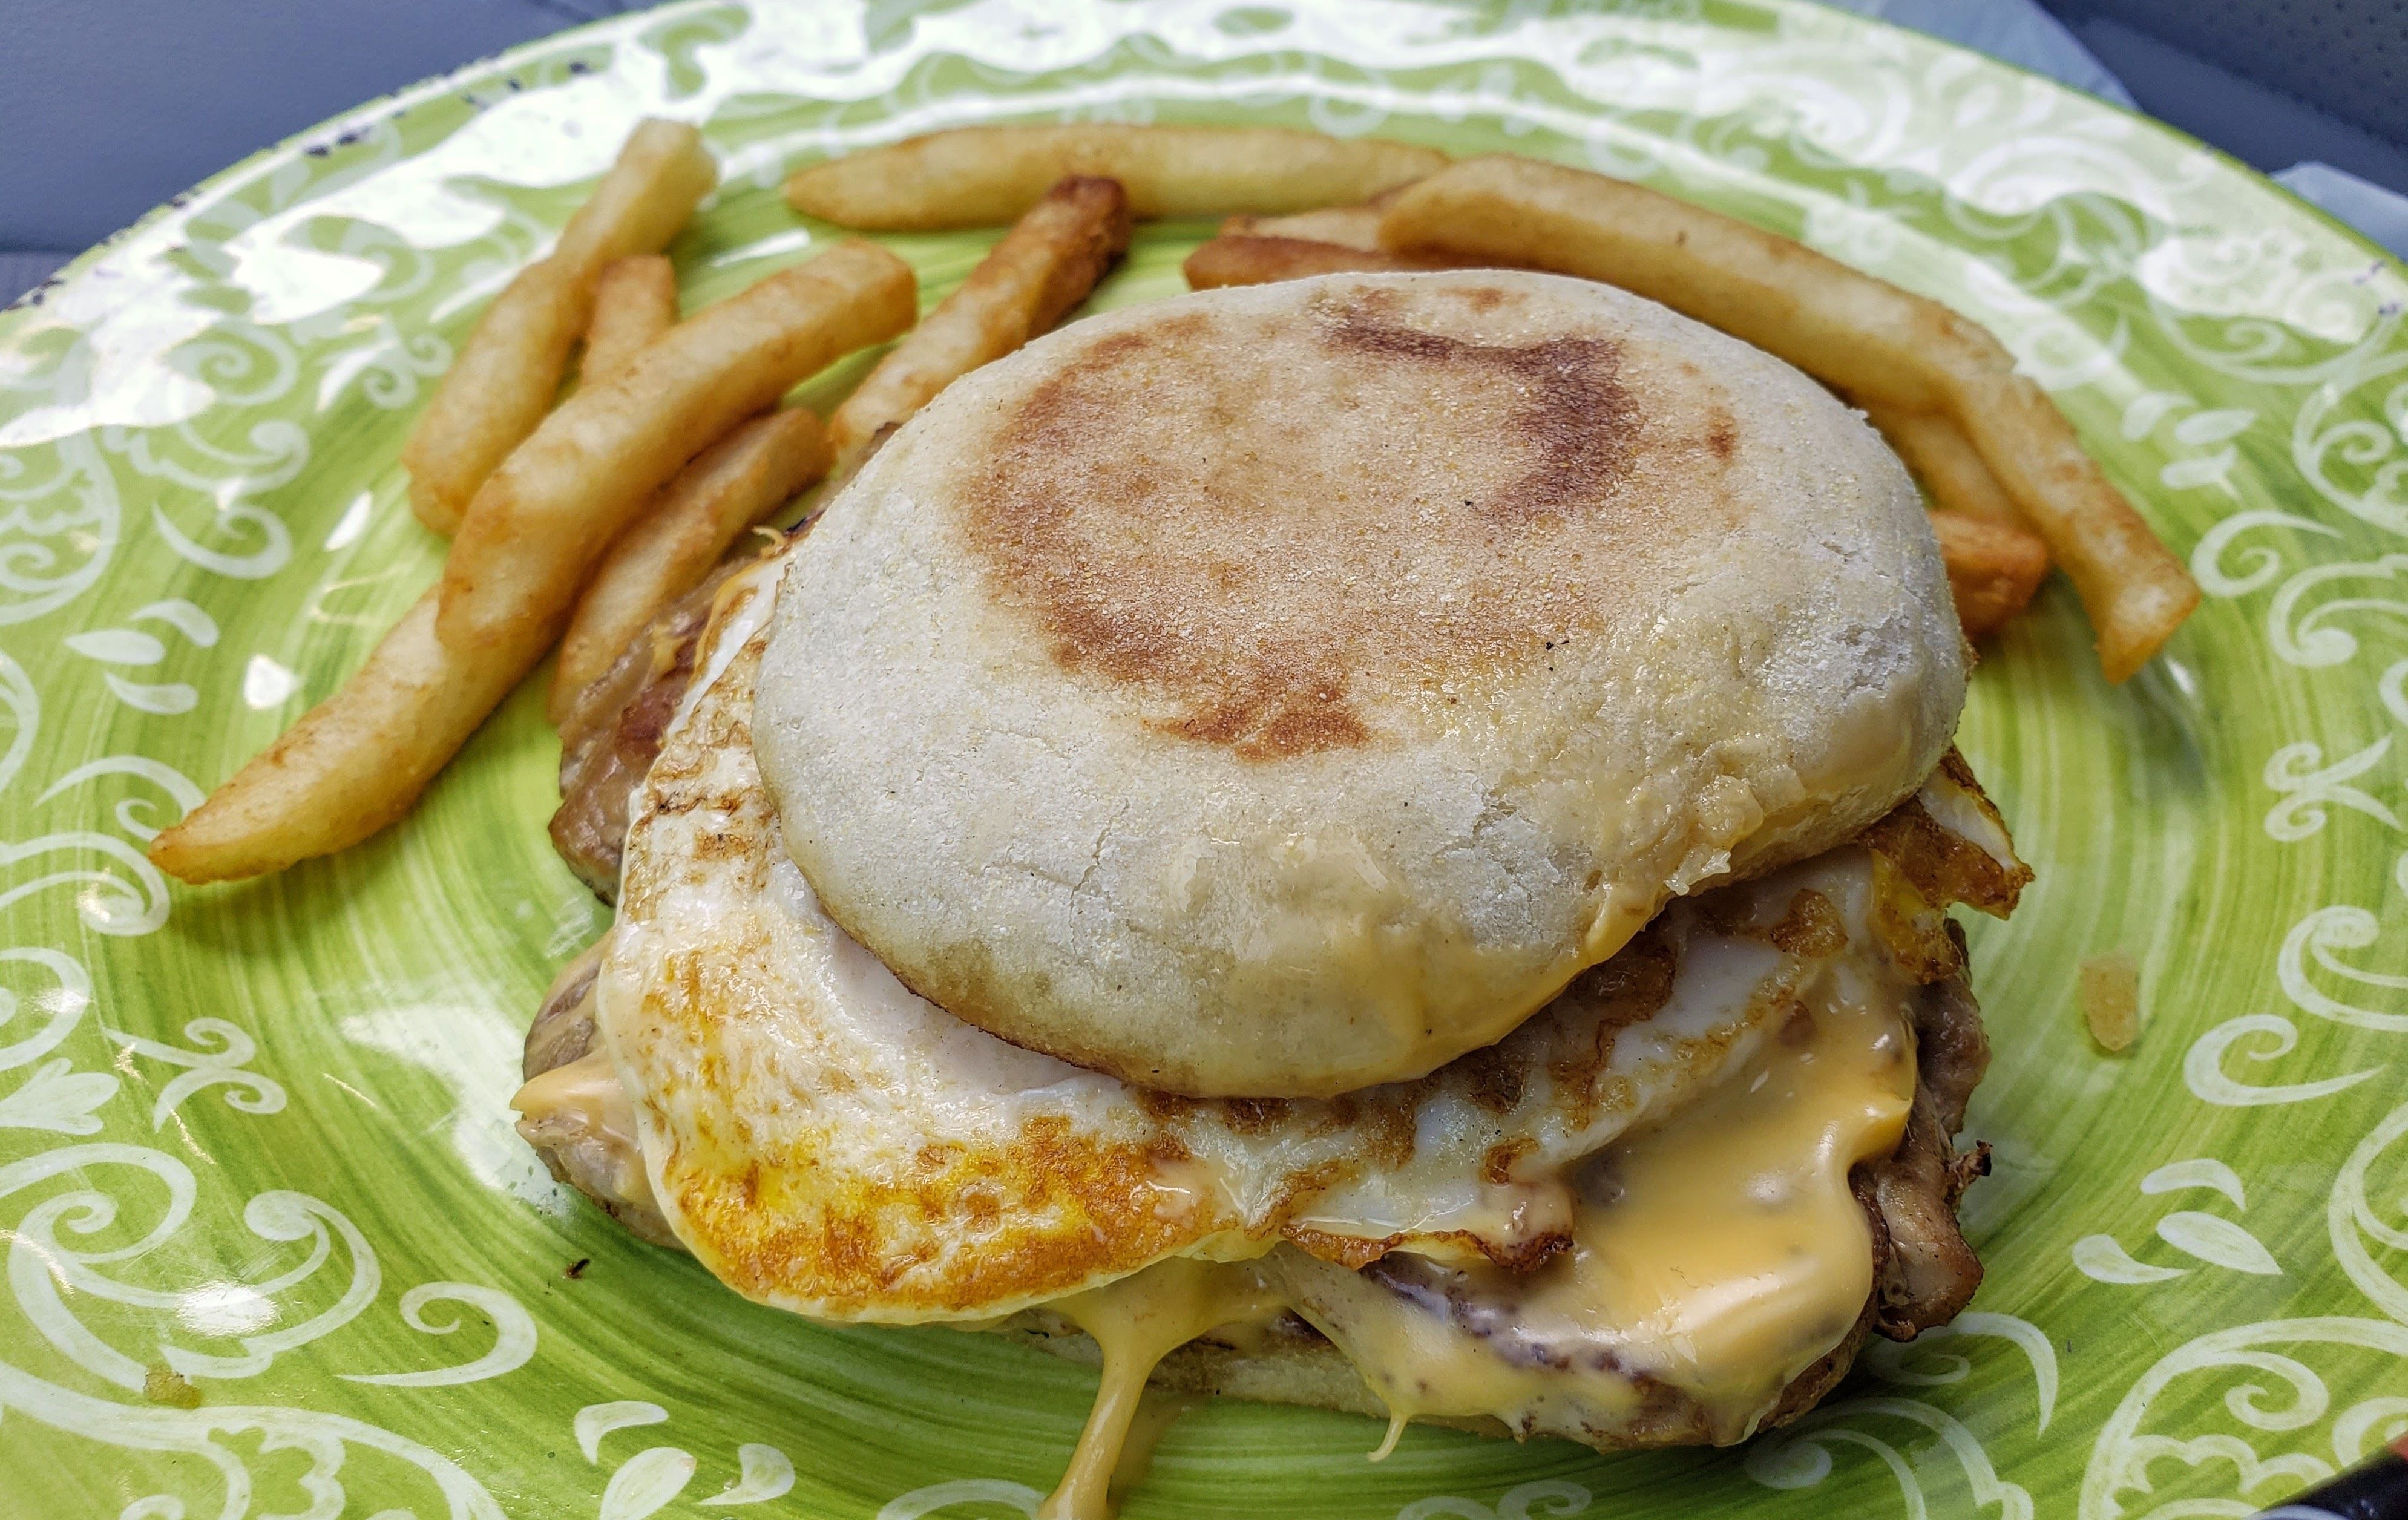 English muffin with egg and cheese and french fries on the side.